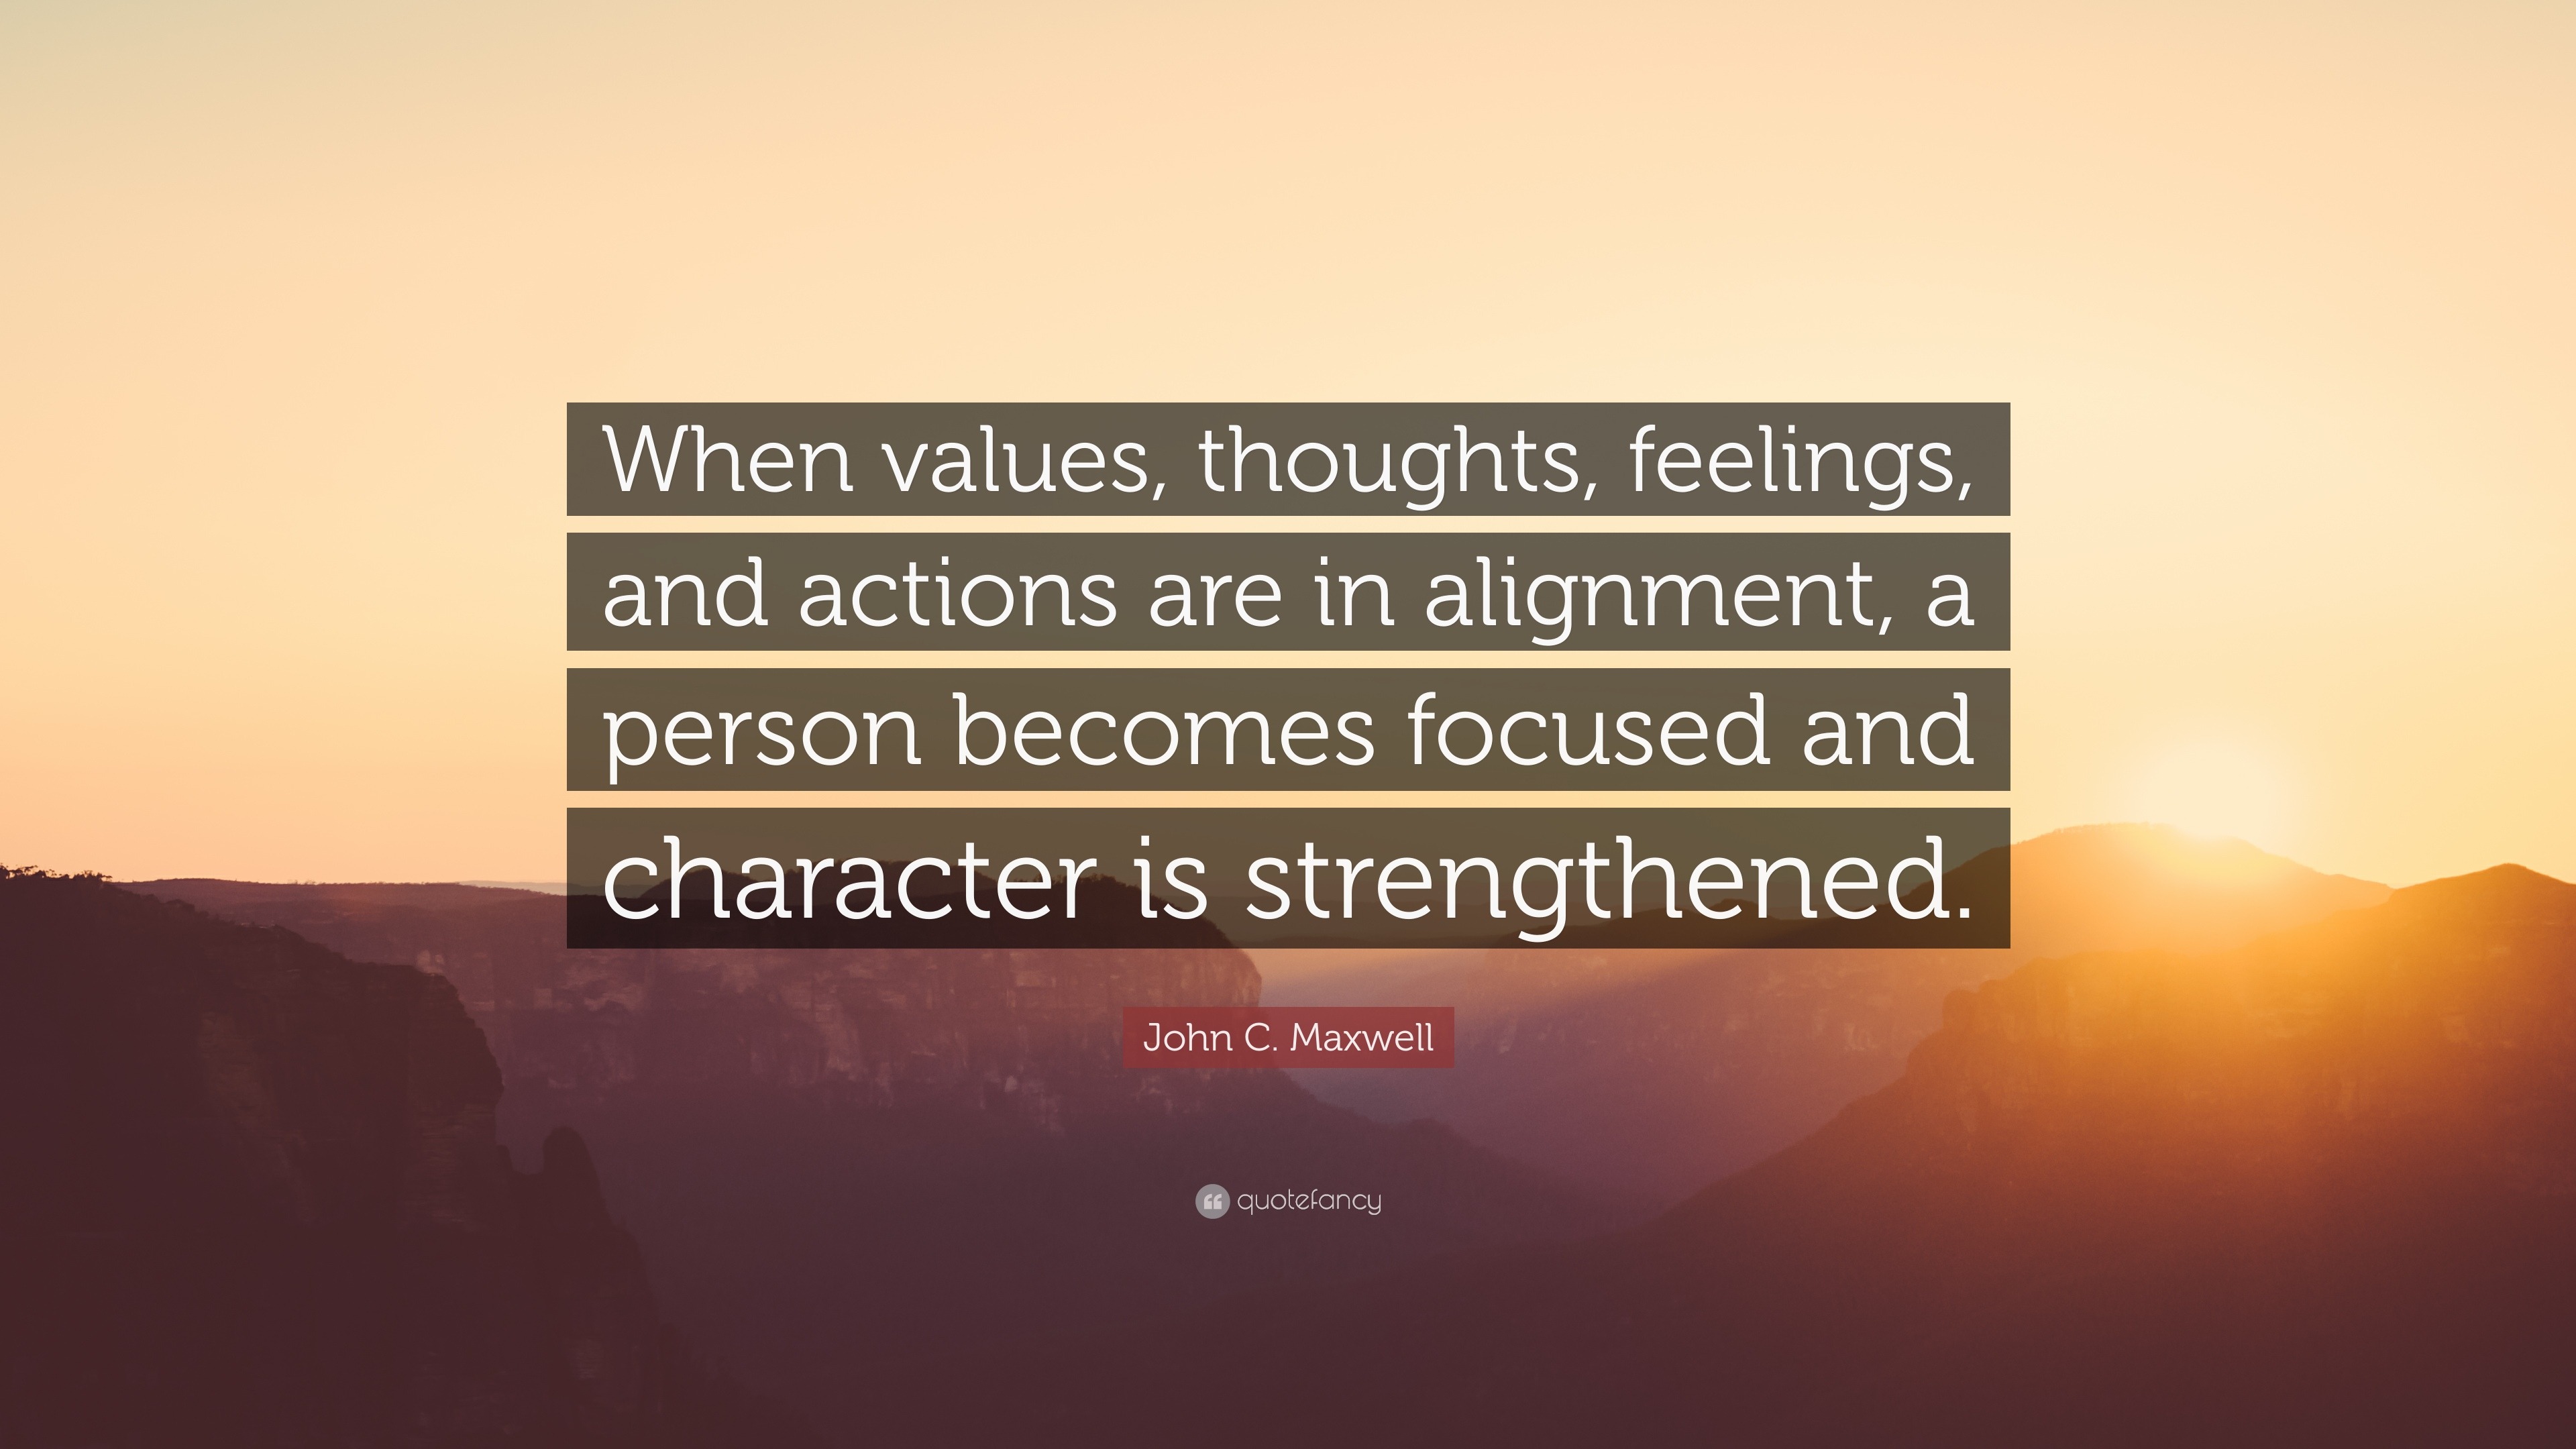 John C. Maxwell Quote “When values, thoughts, feelings